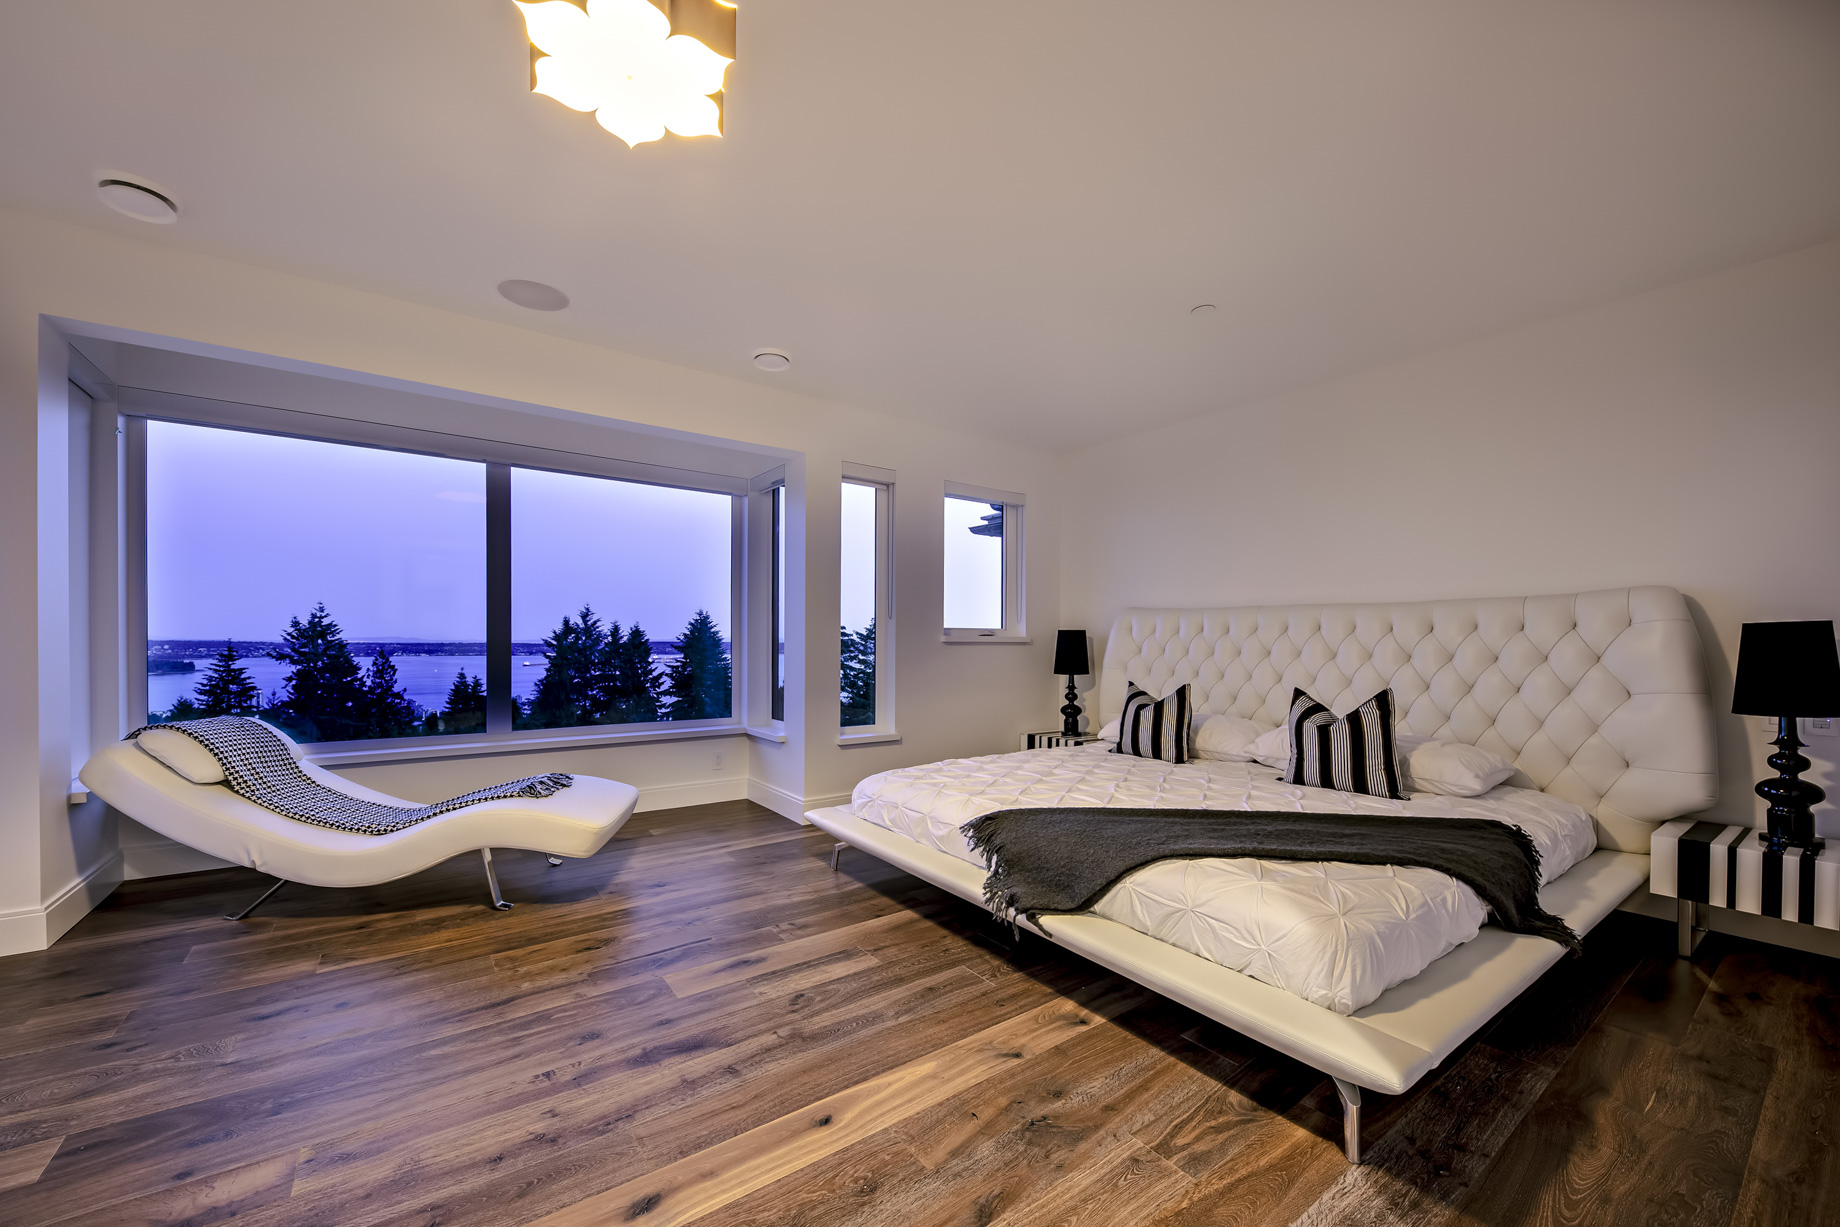 2121 Union Court, West Vancouver, BC, Canada – Master Bedroom – Luxury Real Estate – West Coast Modern Home